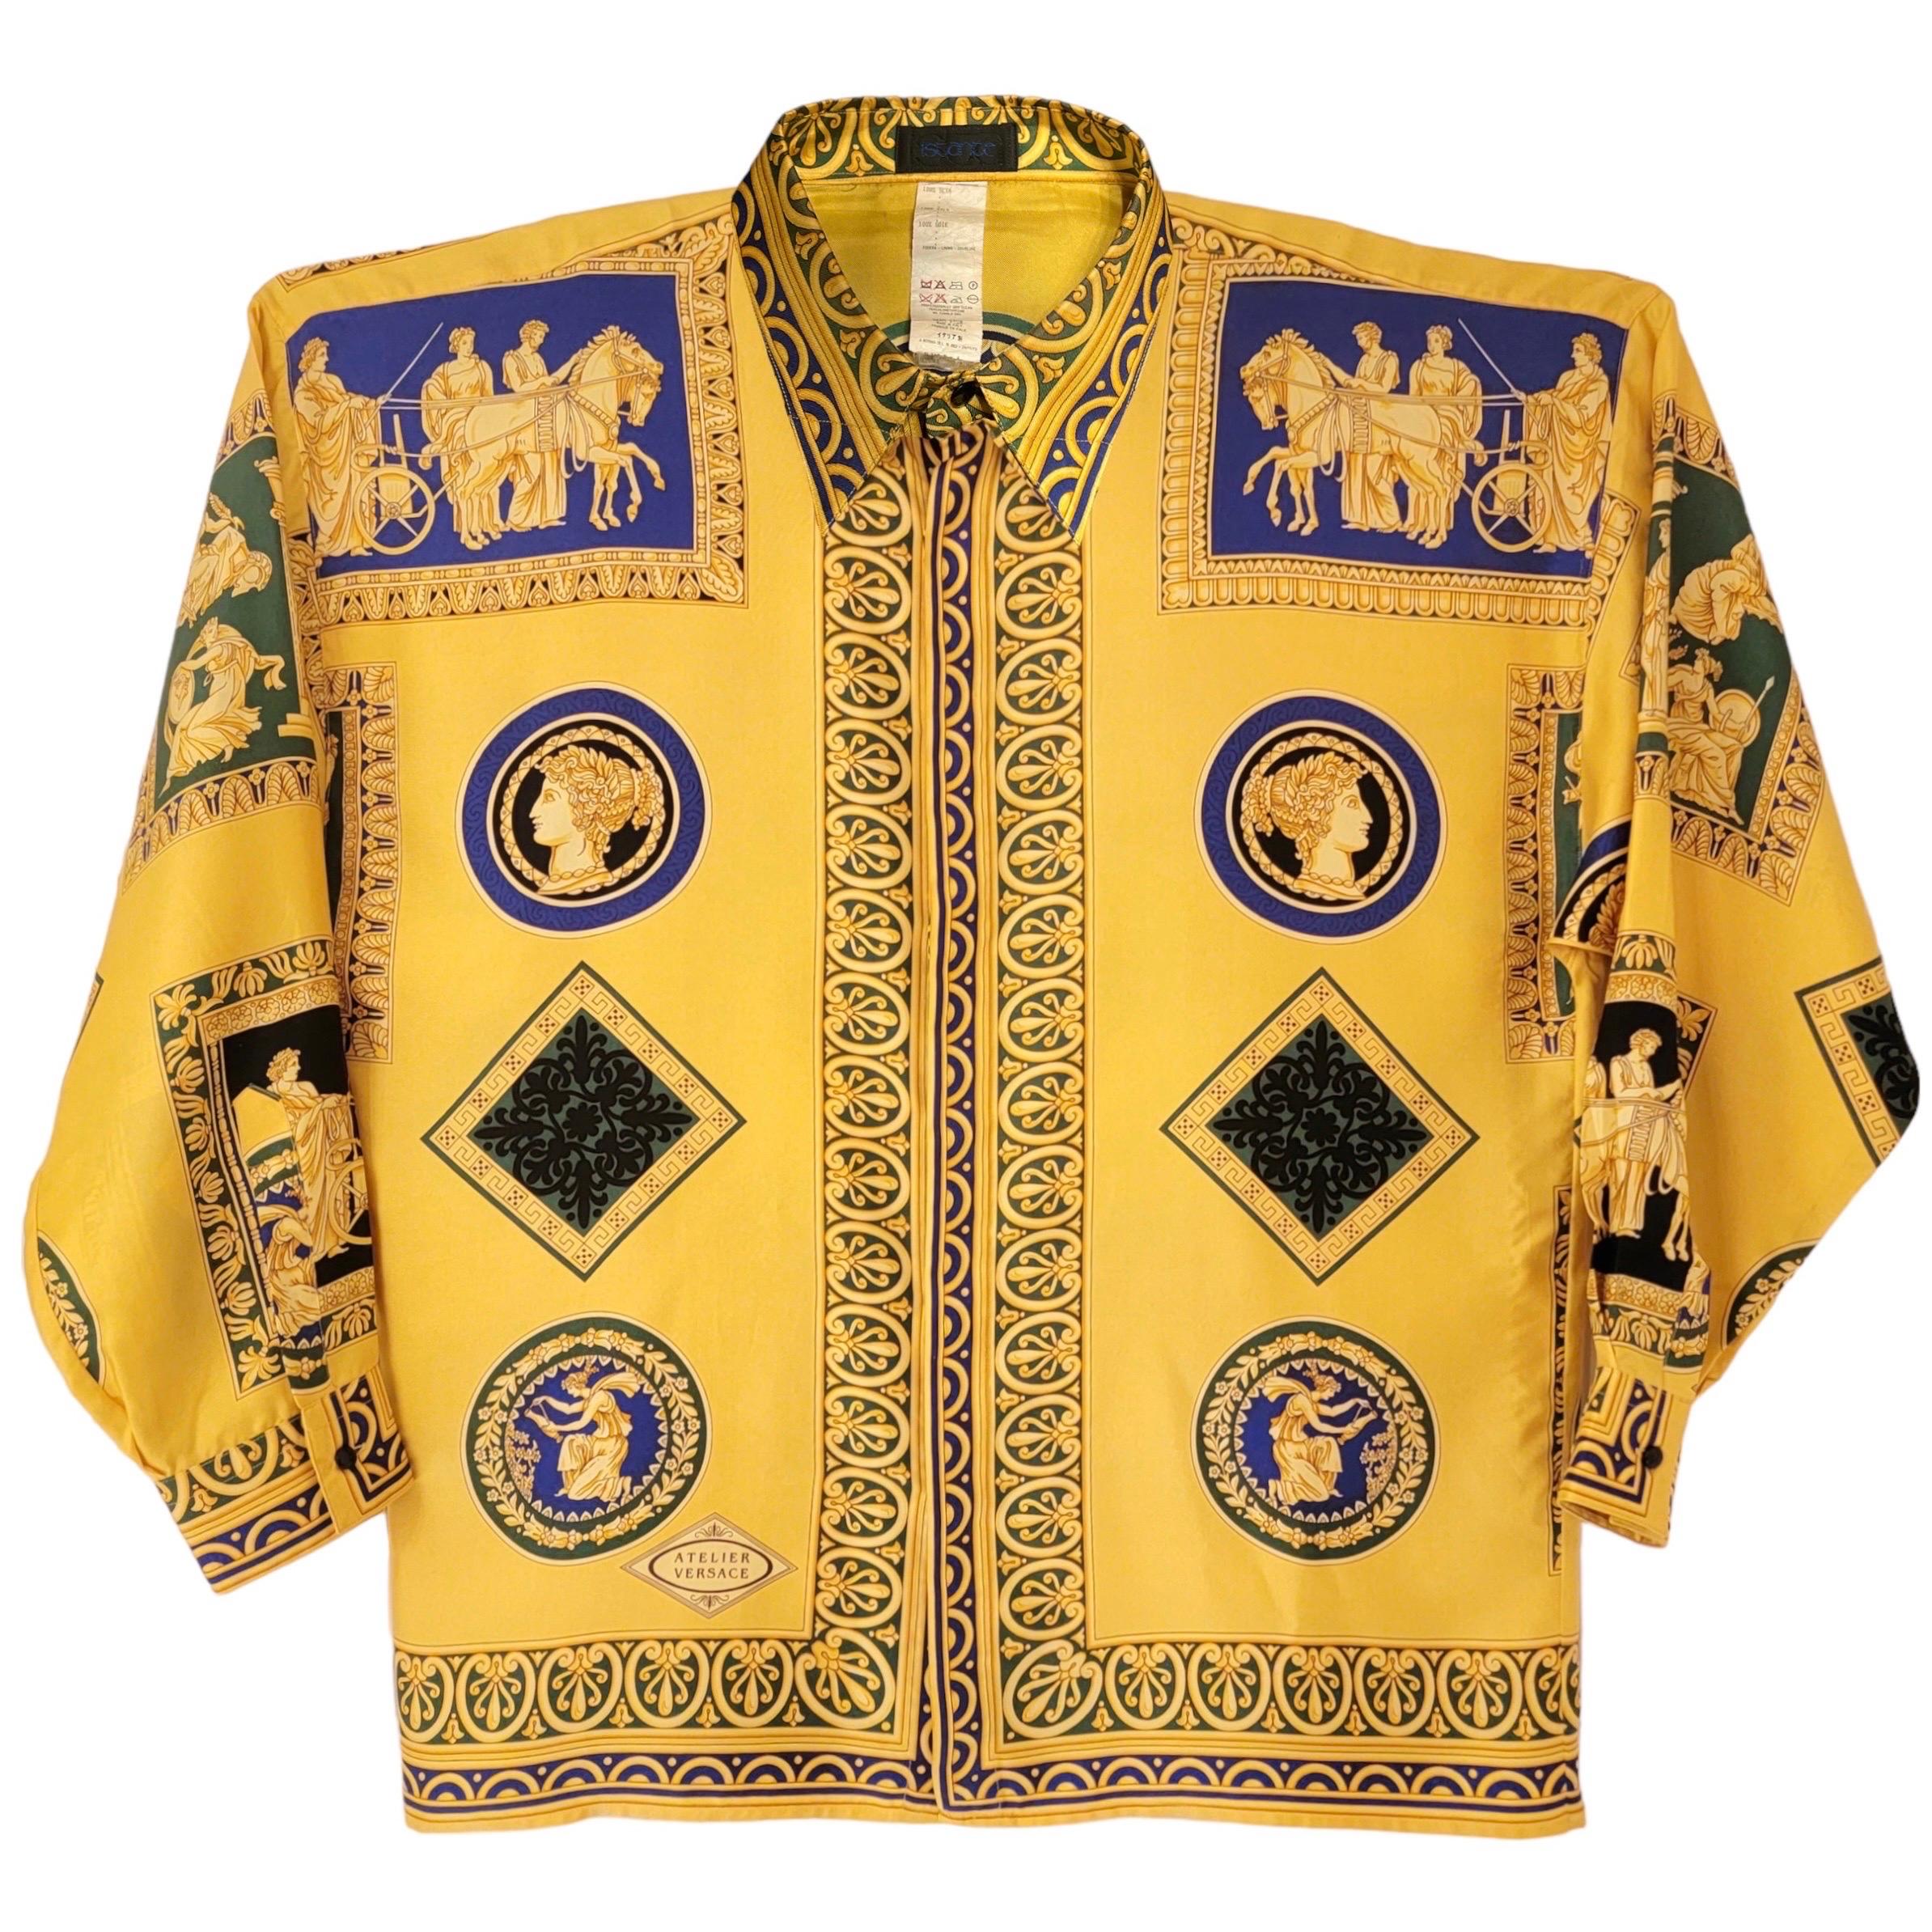 Gianni Versace Atelier labeled Istante line Silk Shirt from 1992.

This shirt shows framed greek gods/goddesses in mythology motifs with chariots and greek key patterns throughout.

Condition: Excellent.

Size: IT 48, a Men’s US size Medium, This